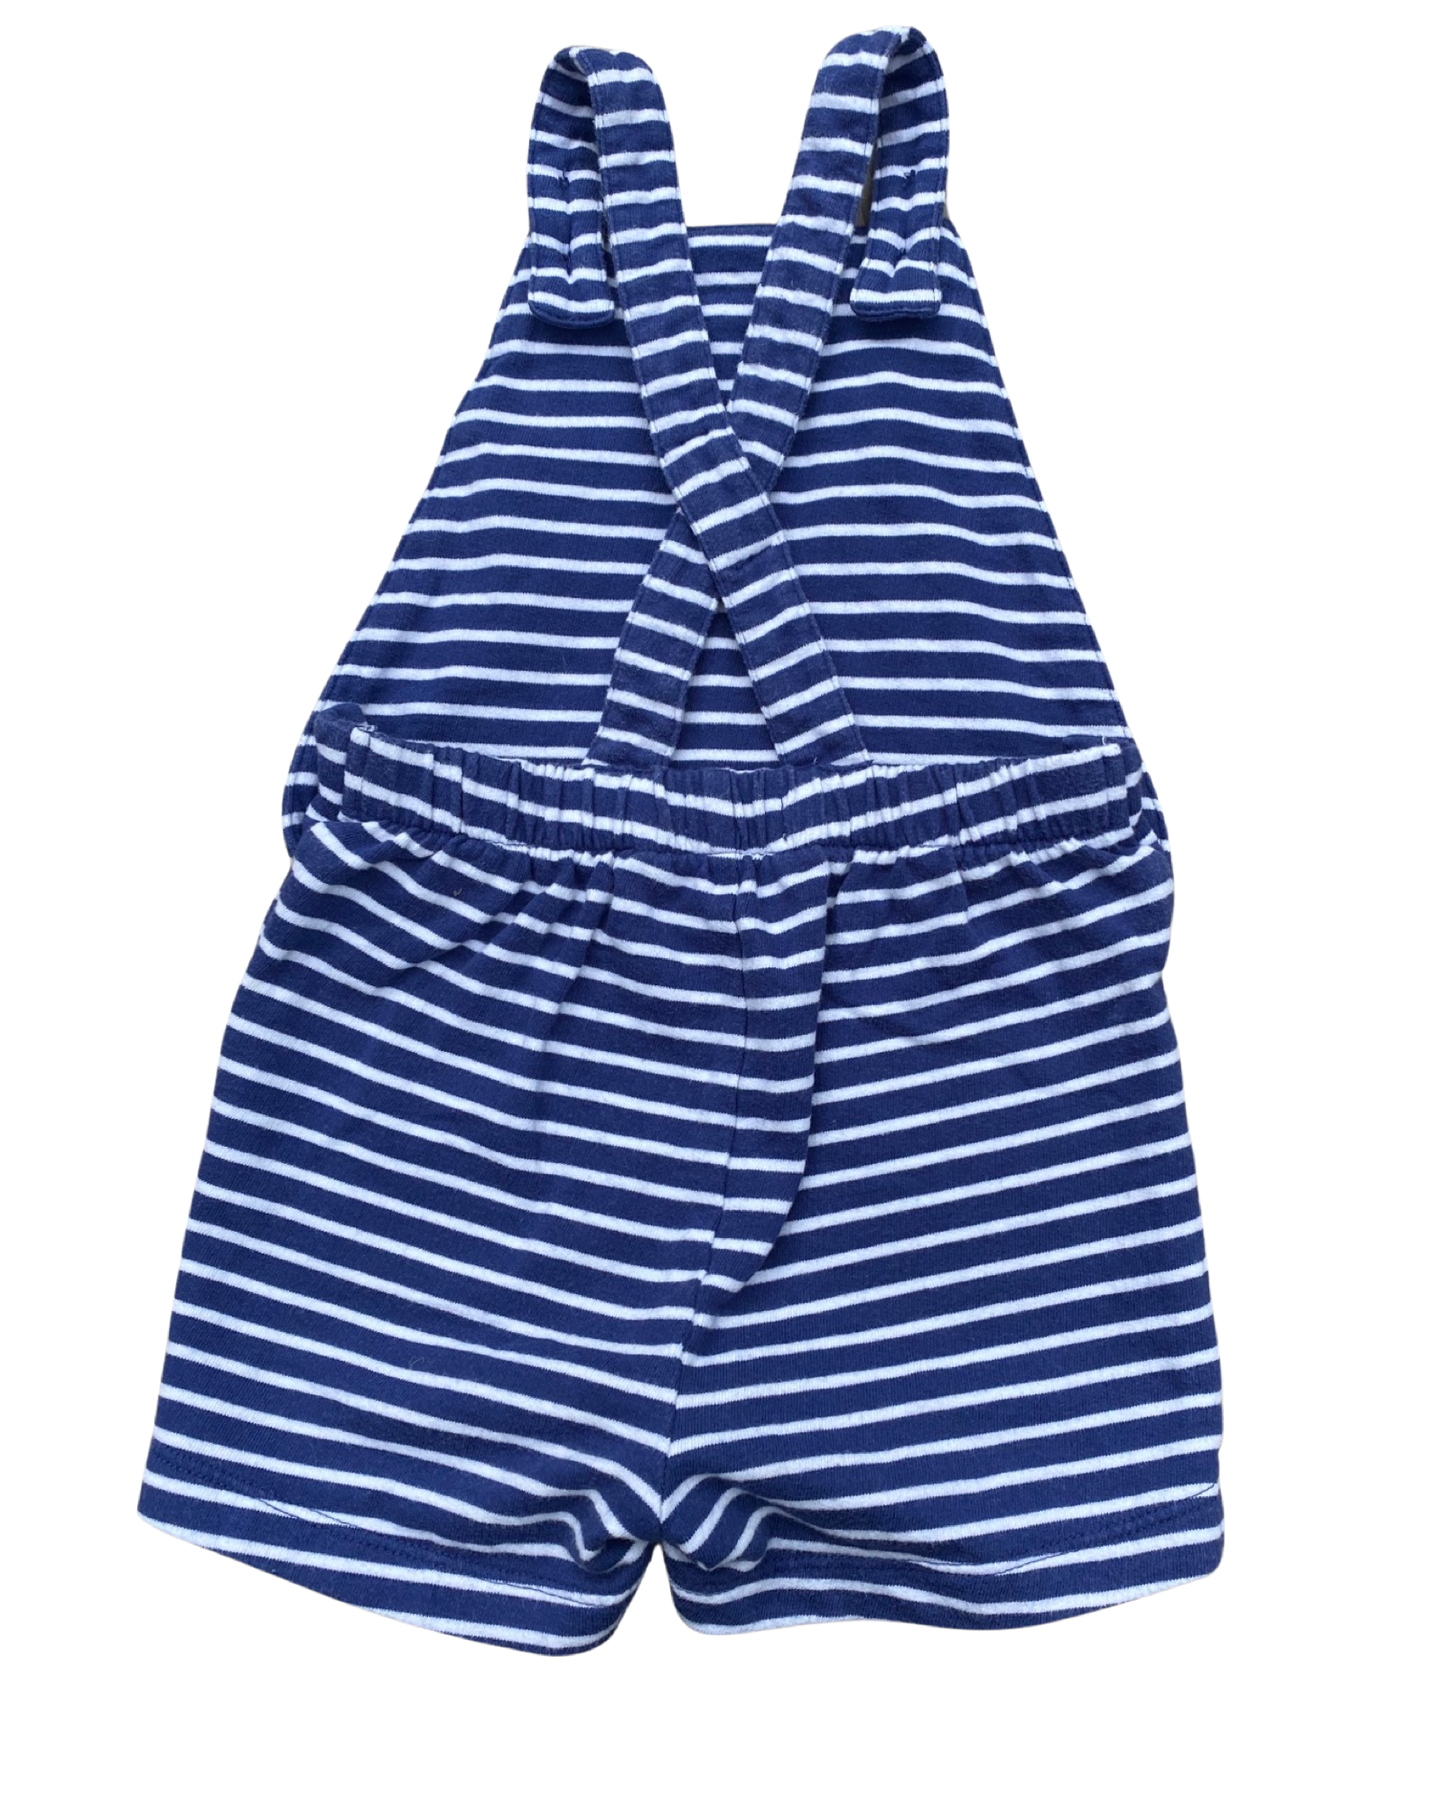 Baby Boden striped short jersey dungarees (6-9mths)